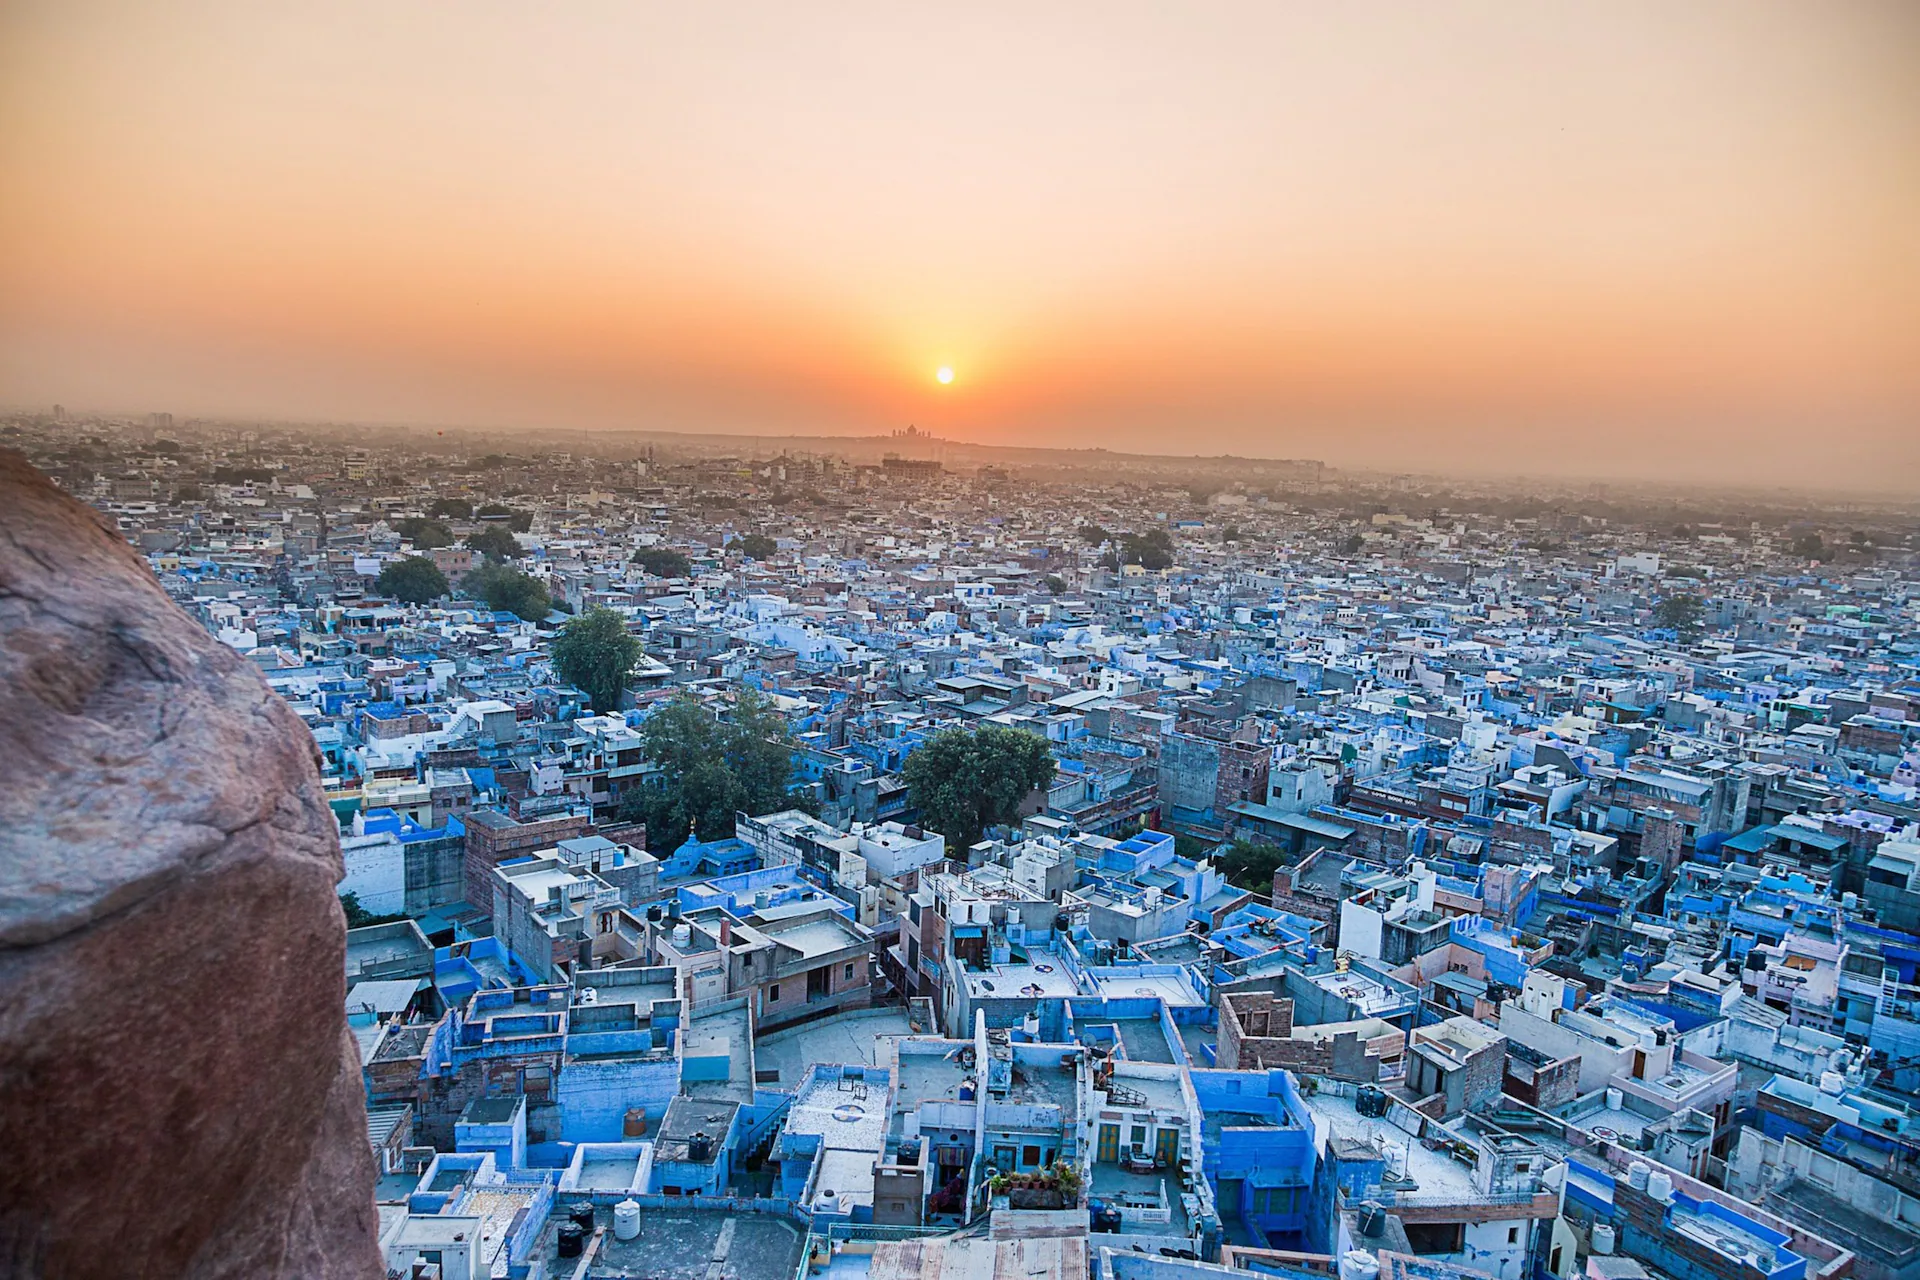 Jodhpur city new one of the most colorful cities in the world